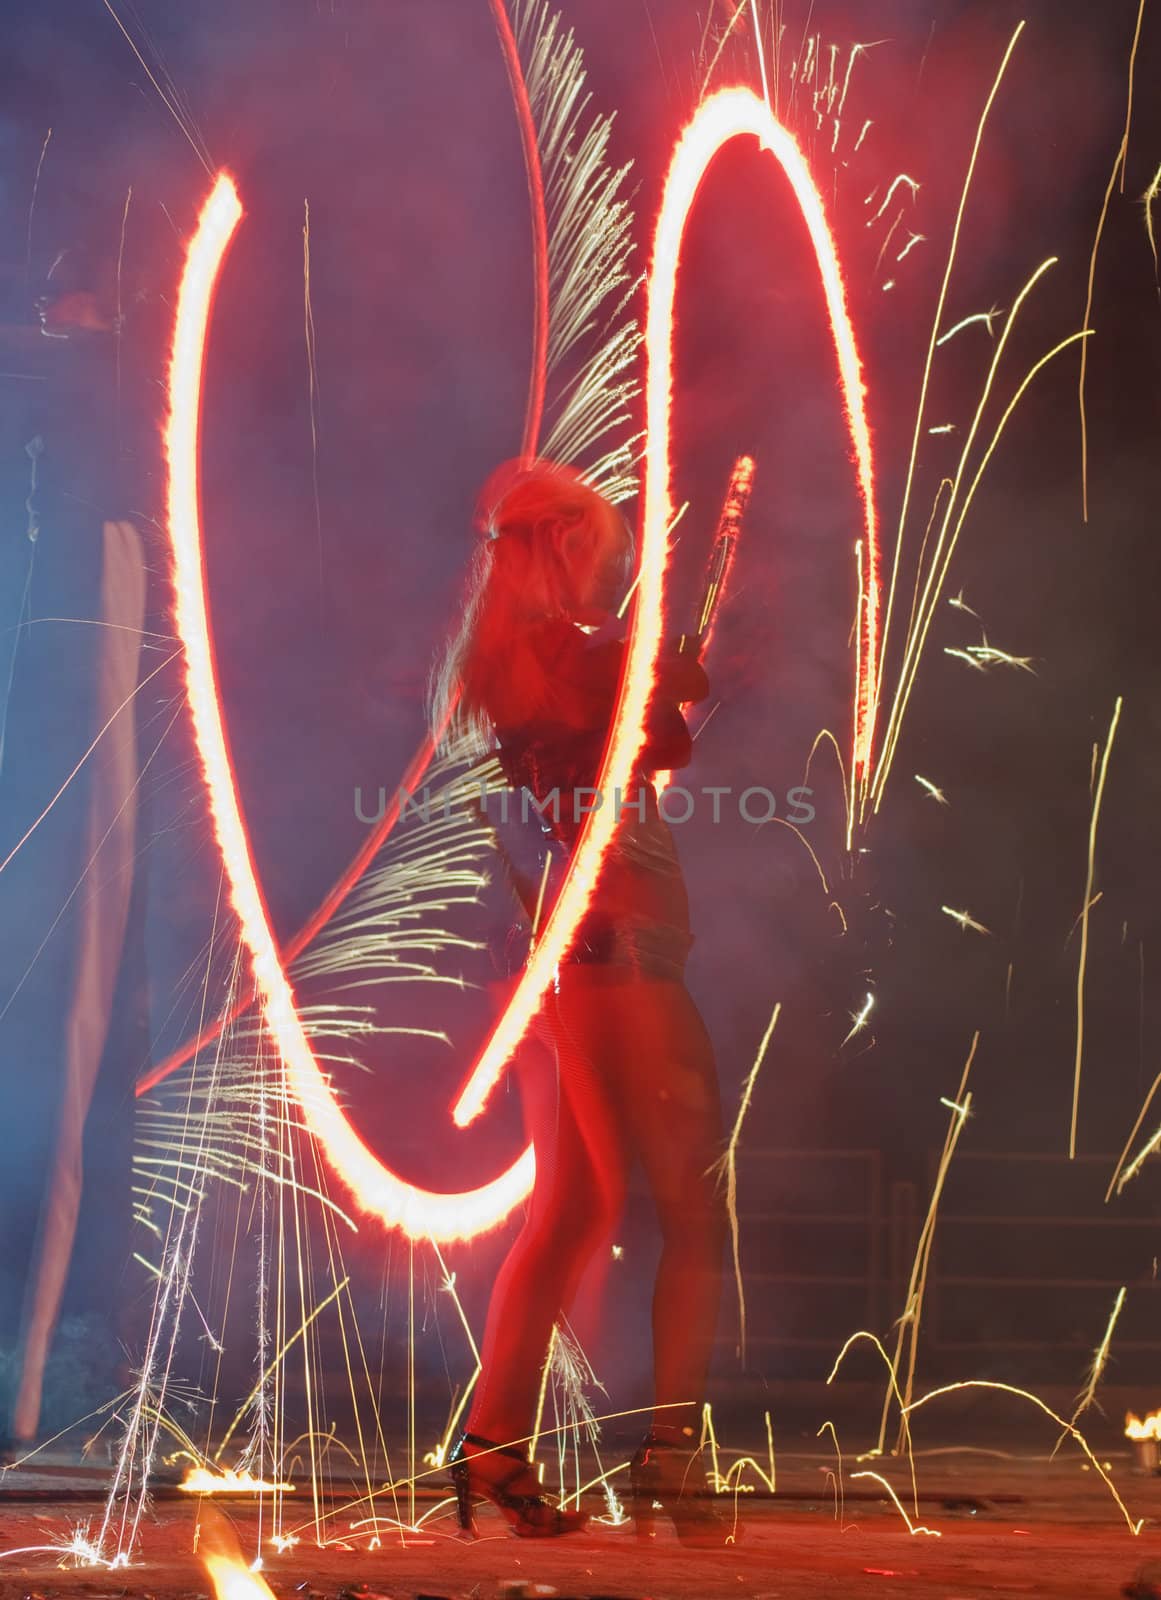 Woman performing a dangerous fire show by spinning a pole engulfed in flames.Defocused